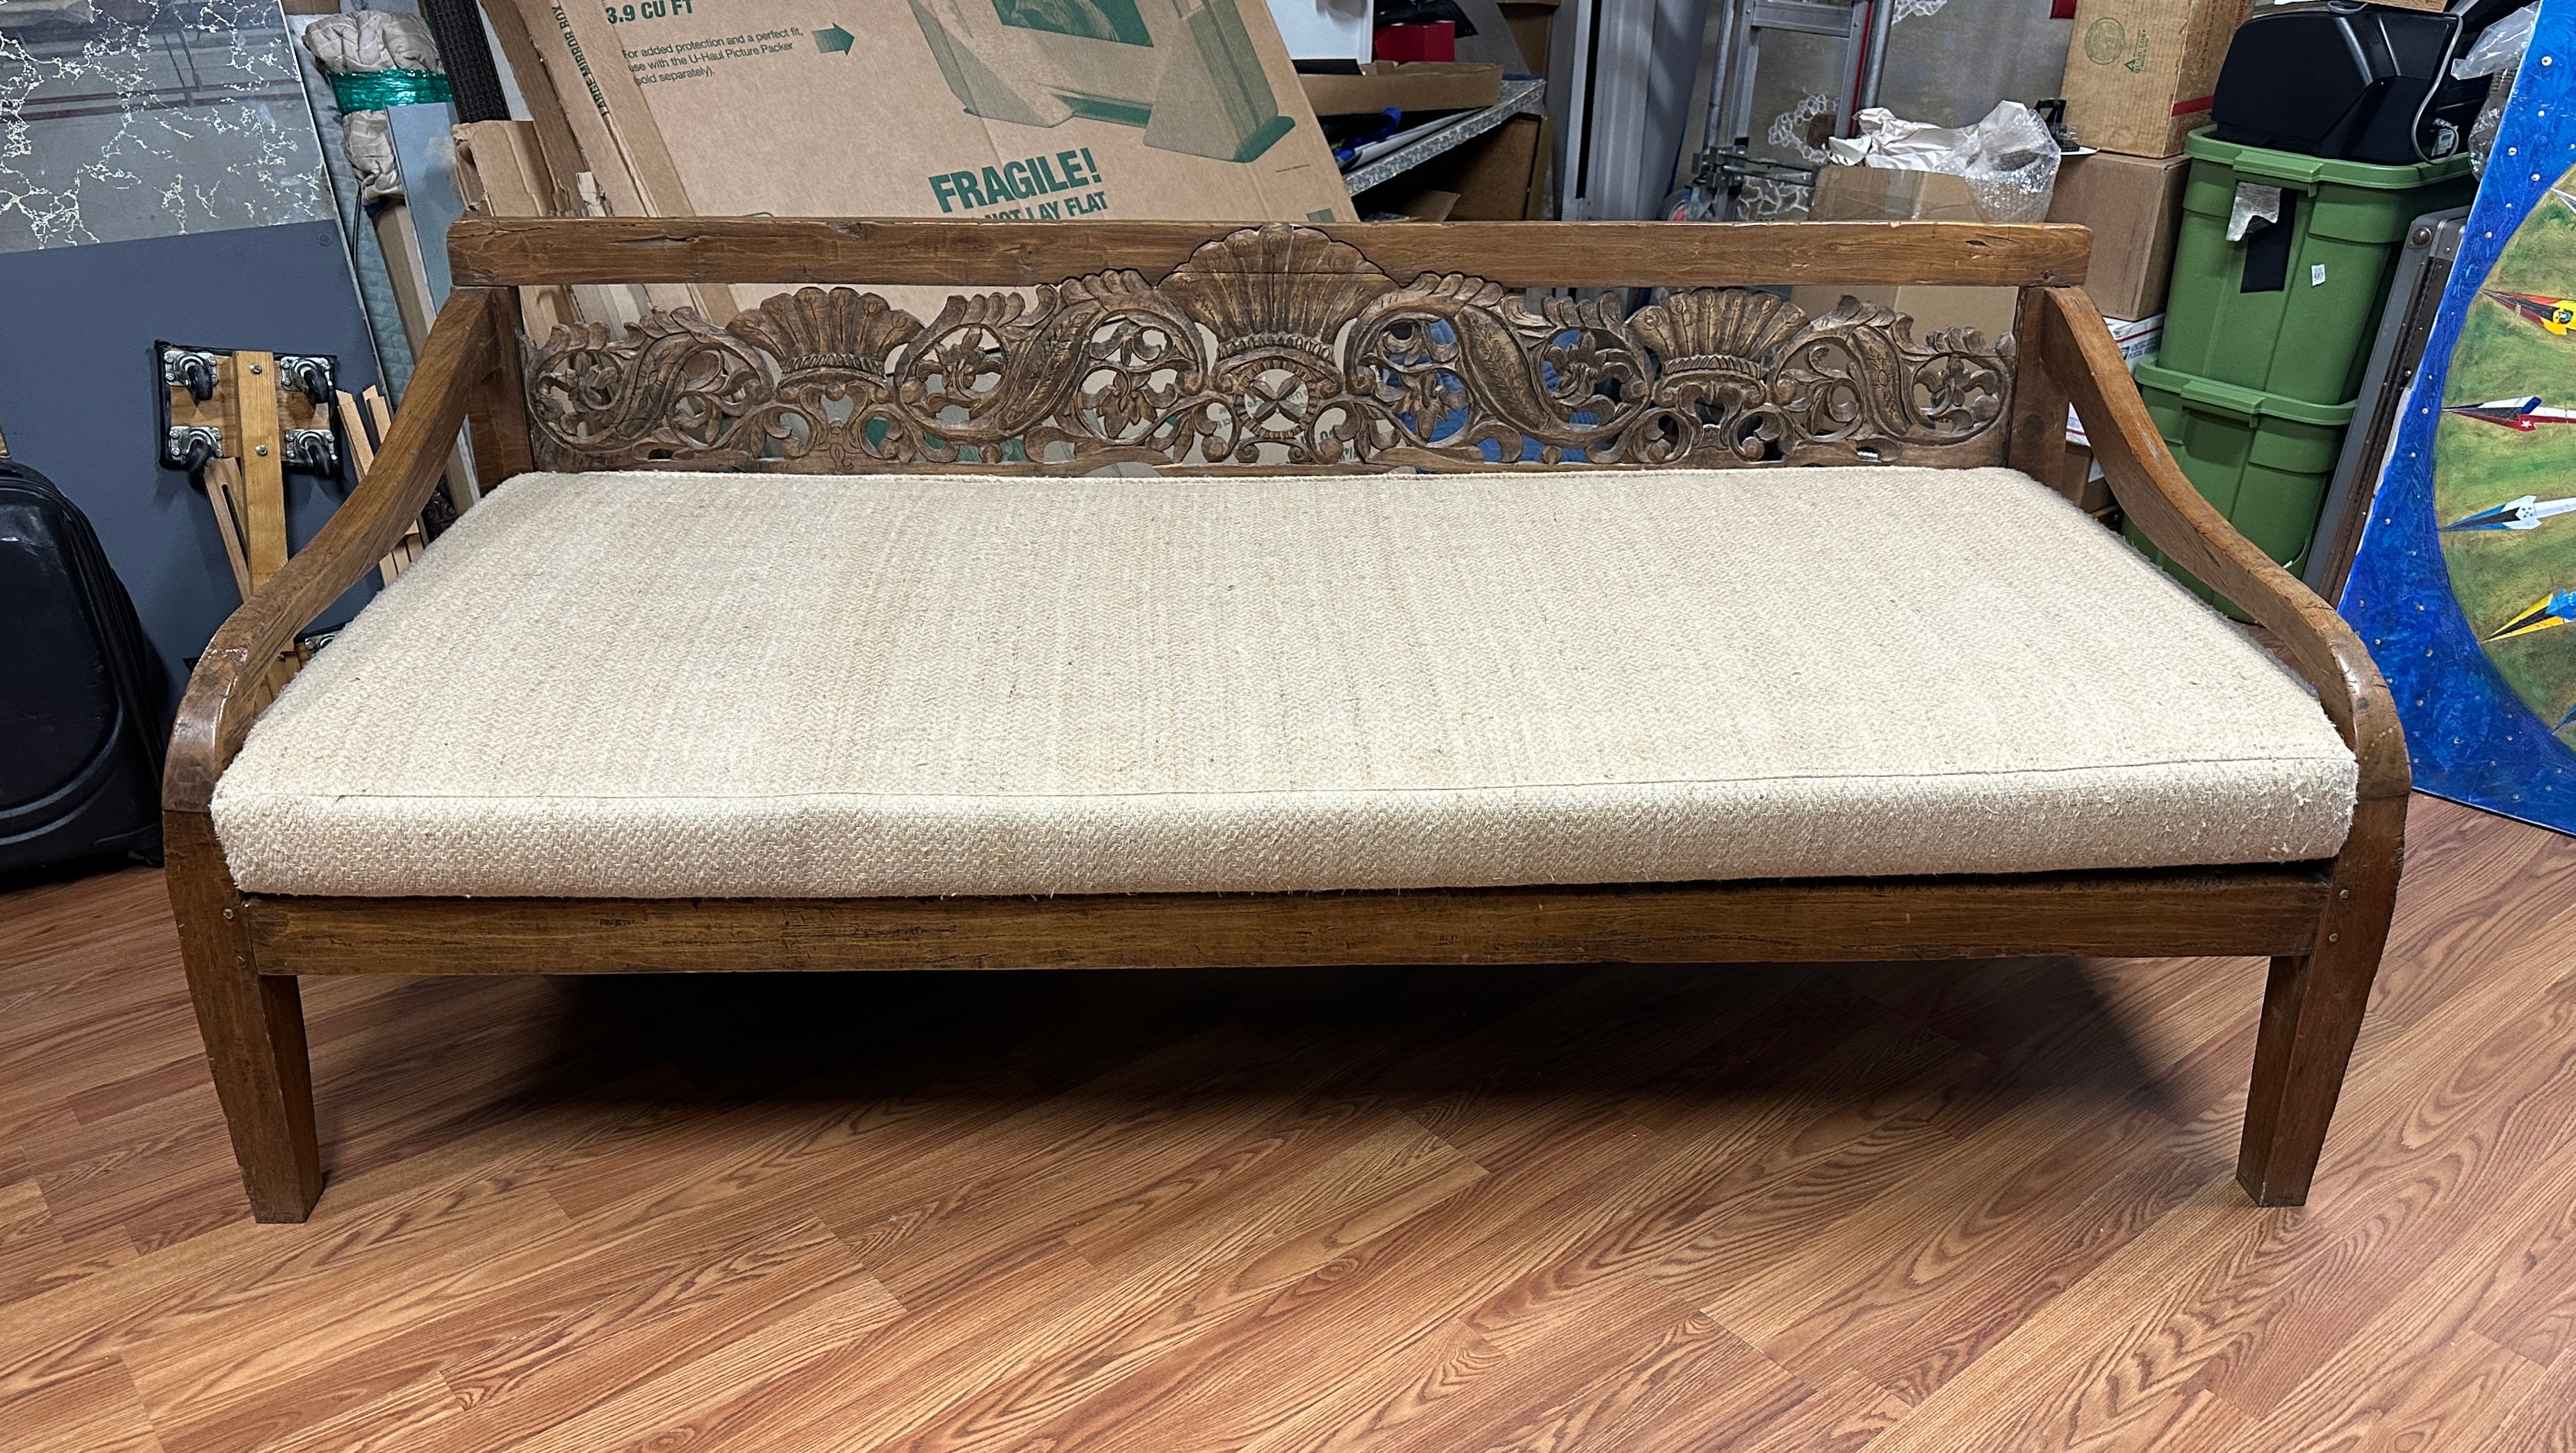 Indonesian Teak Daybed - 5 For Sale on 1stDibs | indonesian day bed